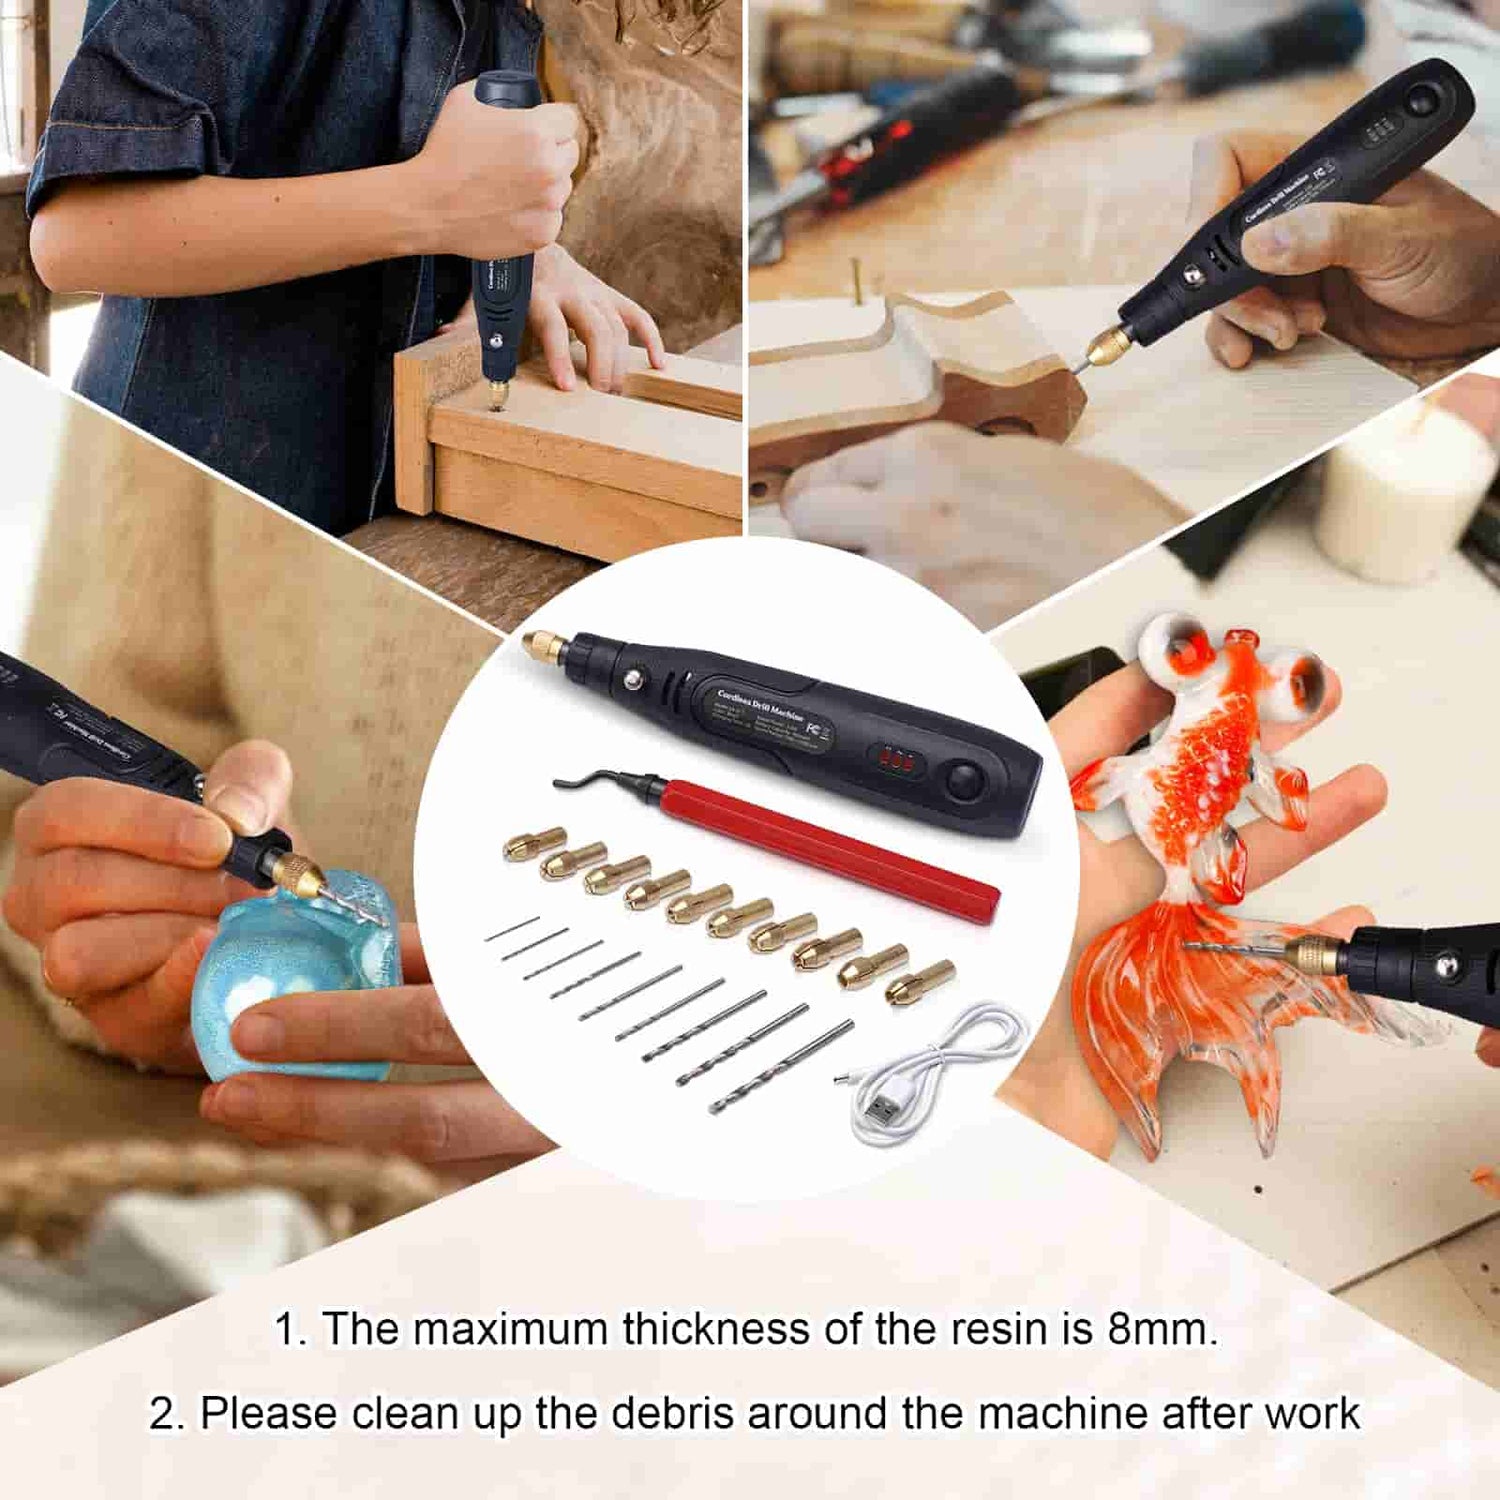 Let's Resin Electric Drill Set Resin Supplies, Jewelry Pendants, Keychain Making Kits,74Pcs Hand Drill Resin Tools